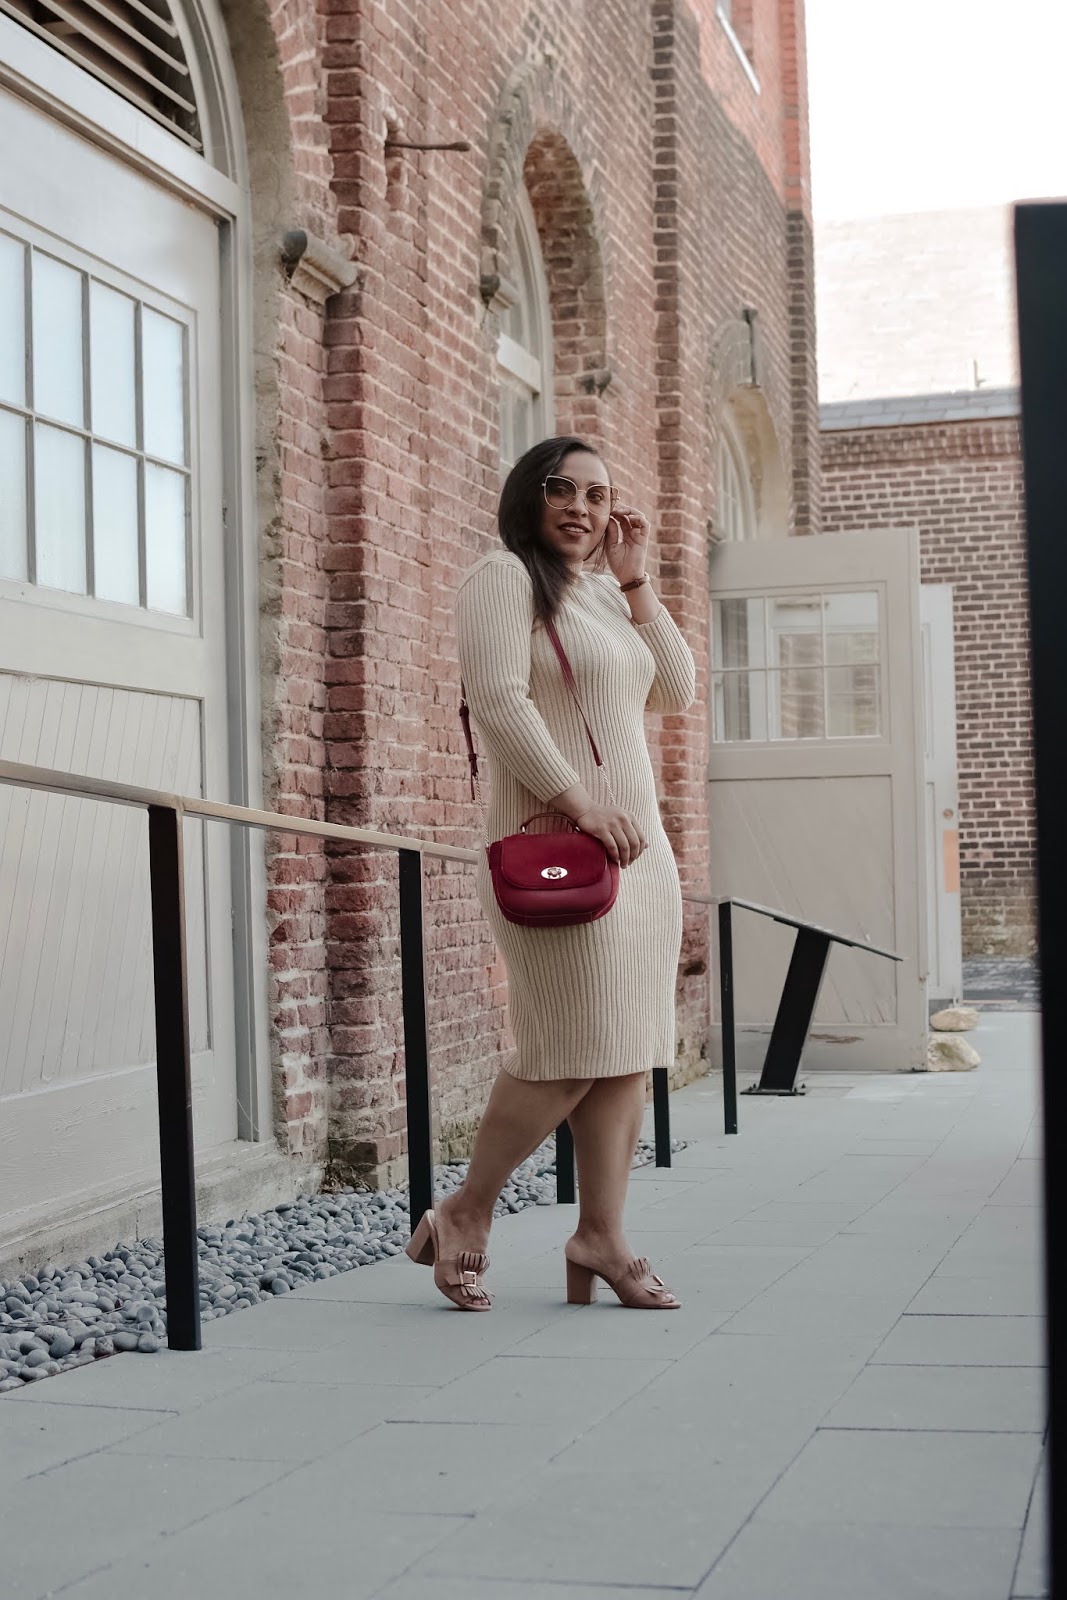 dc bloggers, visit richmond, femme luxe, spring outfit ideas, sweater dress